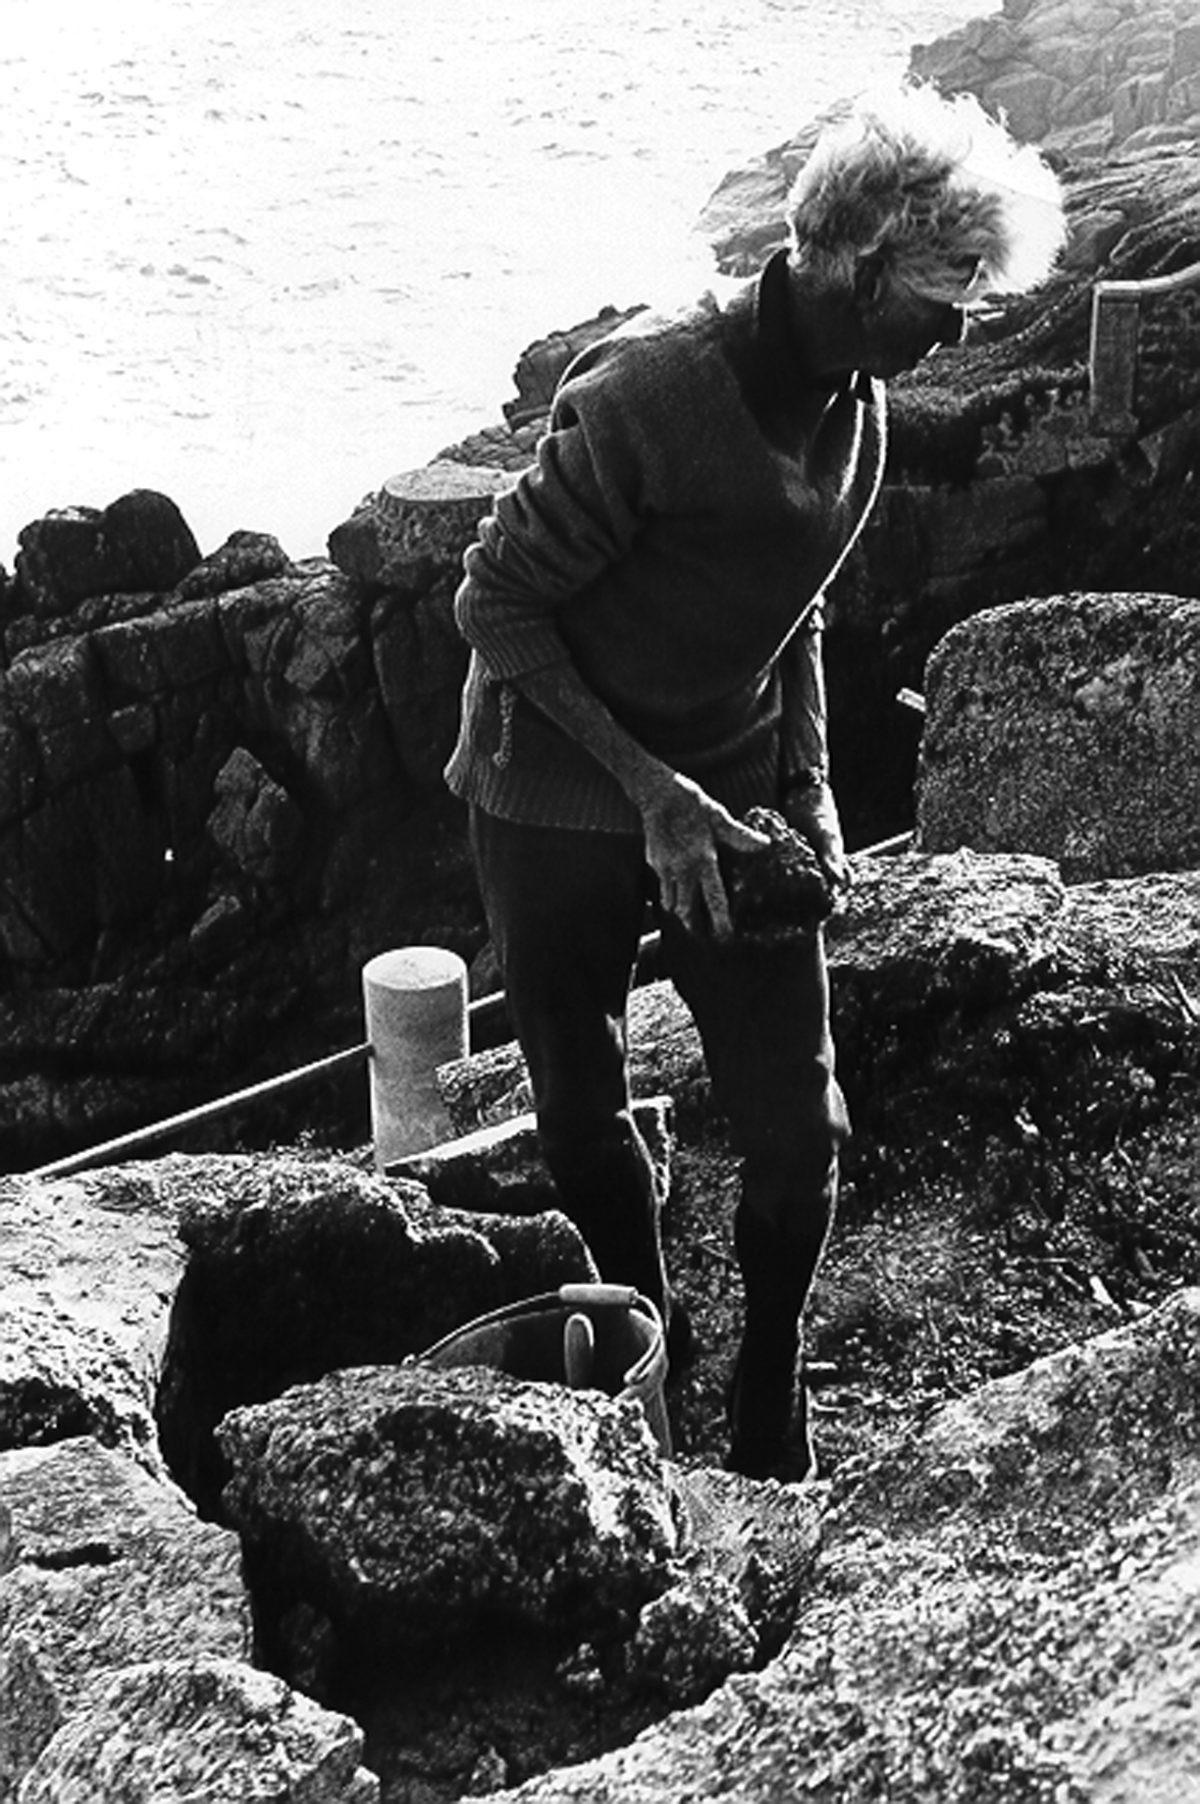 <span style="color: #000000">Rowena Cade, rock in hand, as she builds what will become The Minack Theatre. (The Minack Theatre)</span>